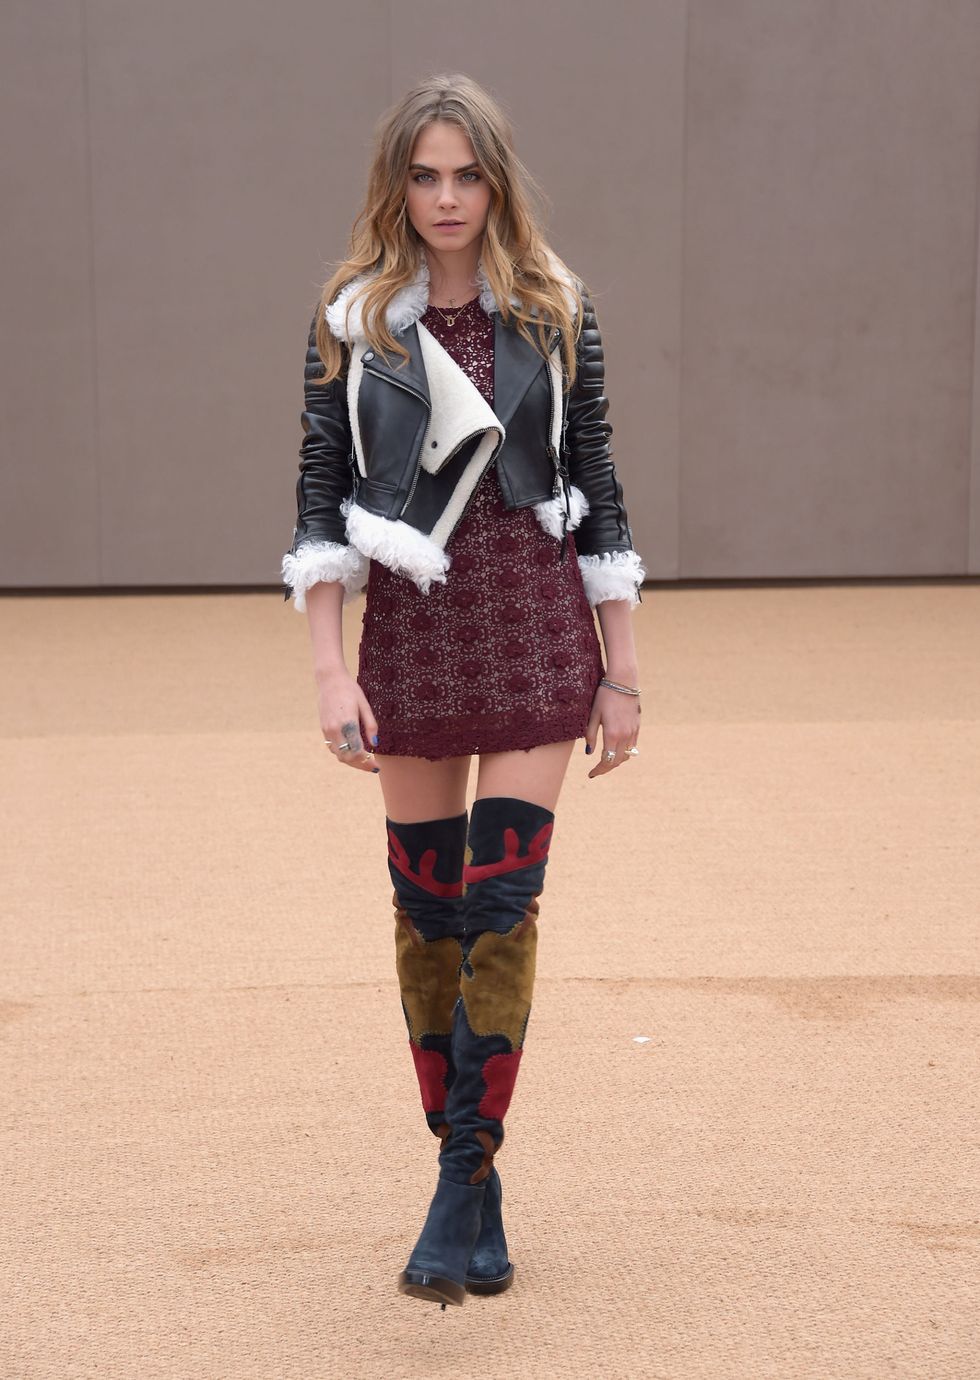 London Fashion Week AW15: what the celebrities are wearing on the front row - Cara Delevingne